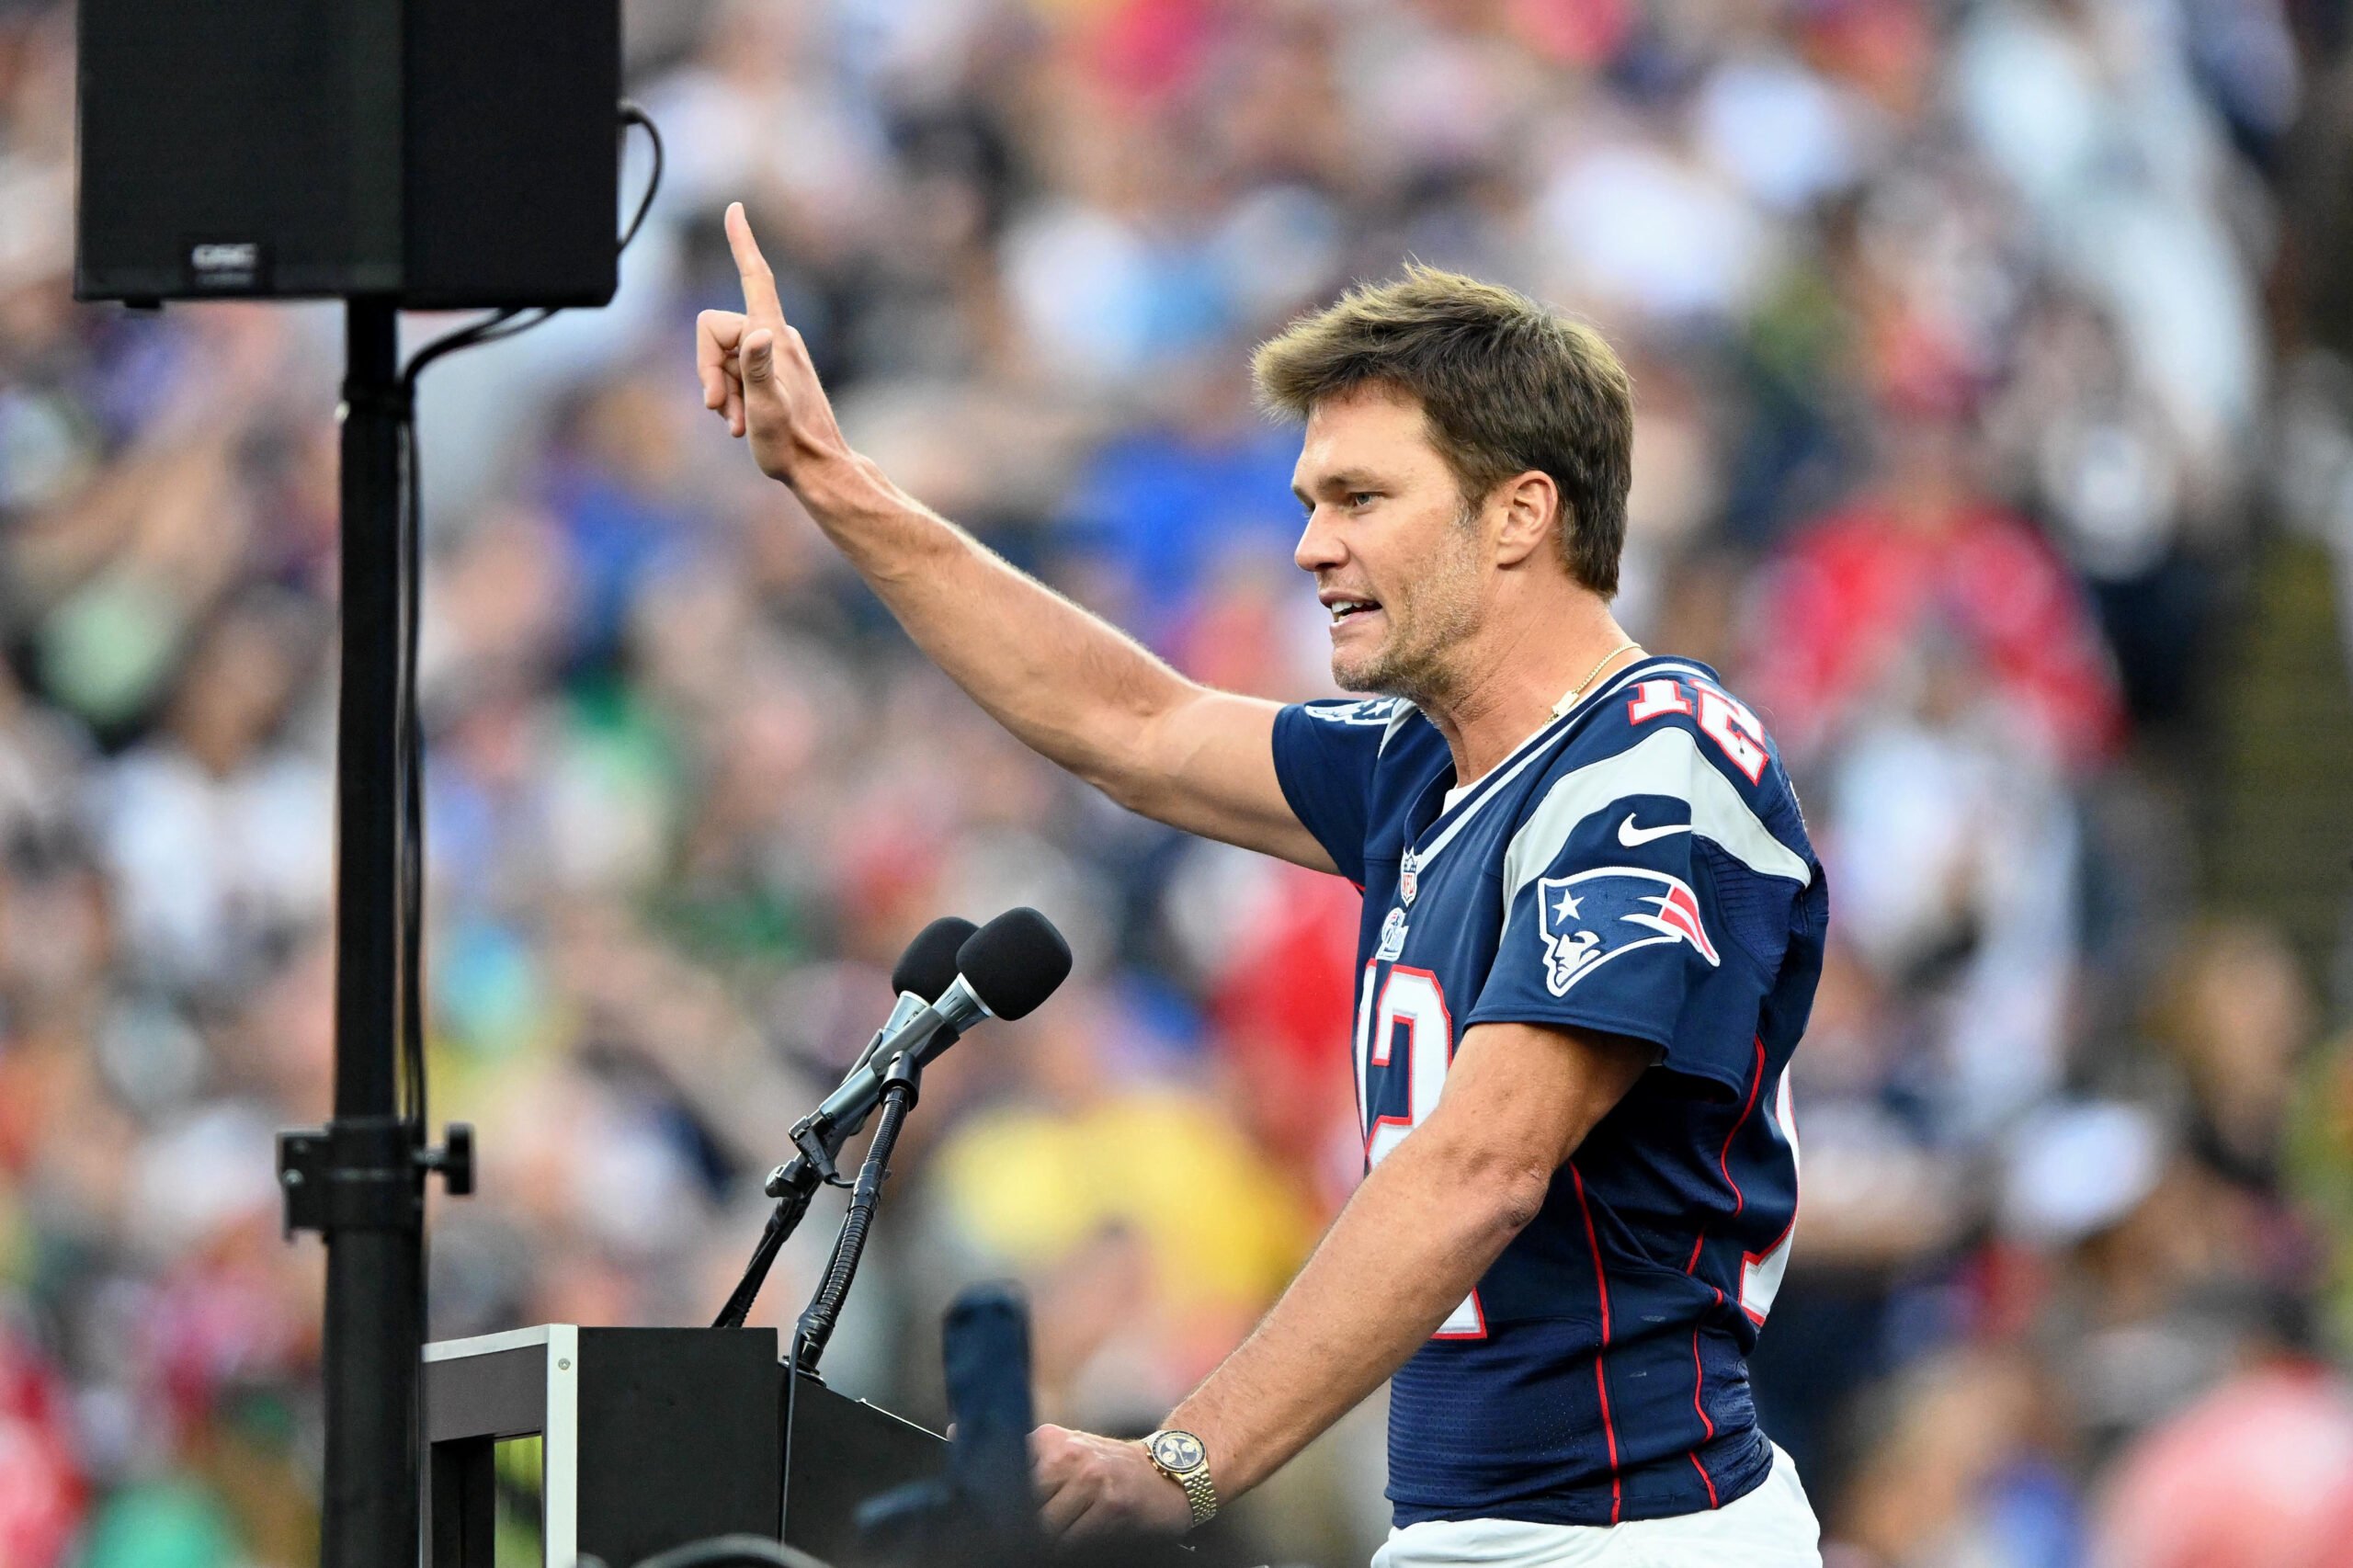 New England Patriots former quarterback Tom Brady speaks during a halftime ceremony in his honor during the game between the Philadelphia Eagles and New England Patriots at Gillette Stadium.